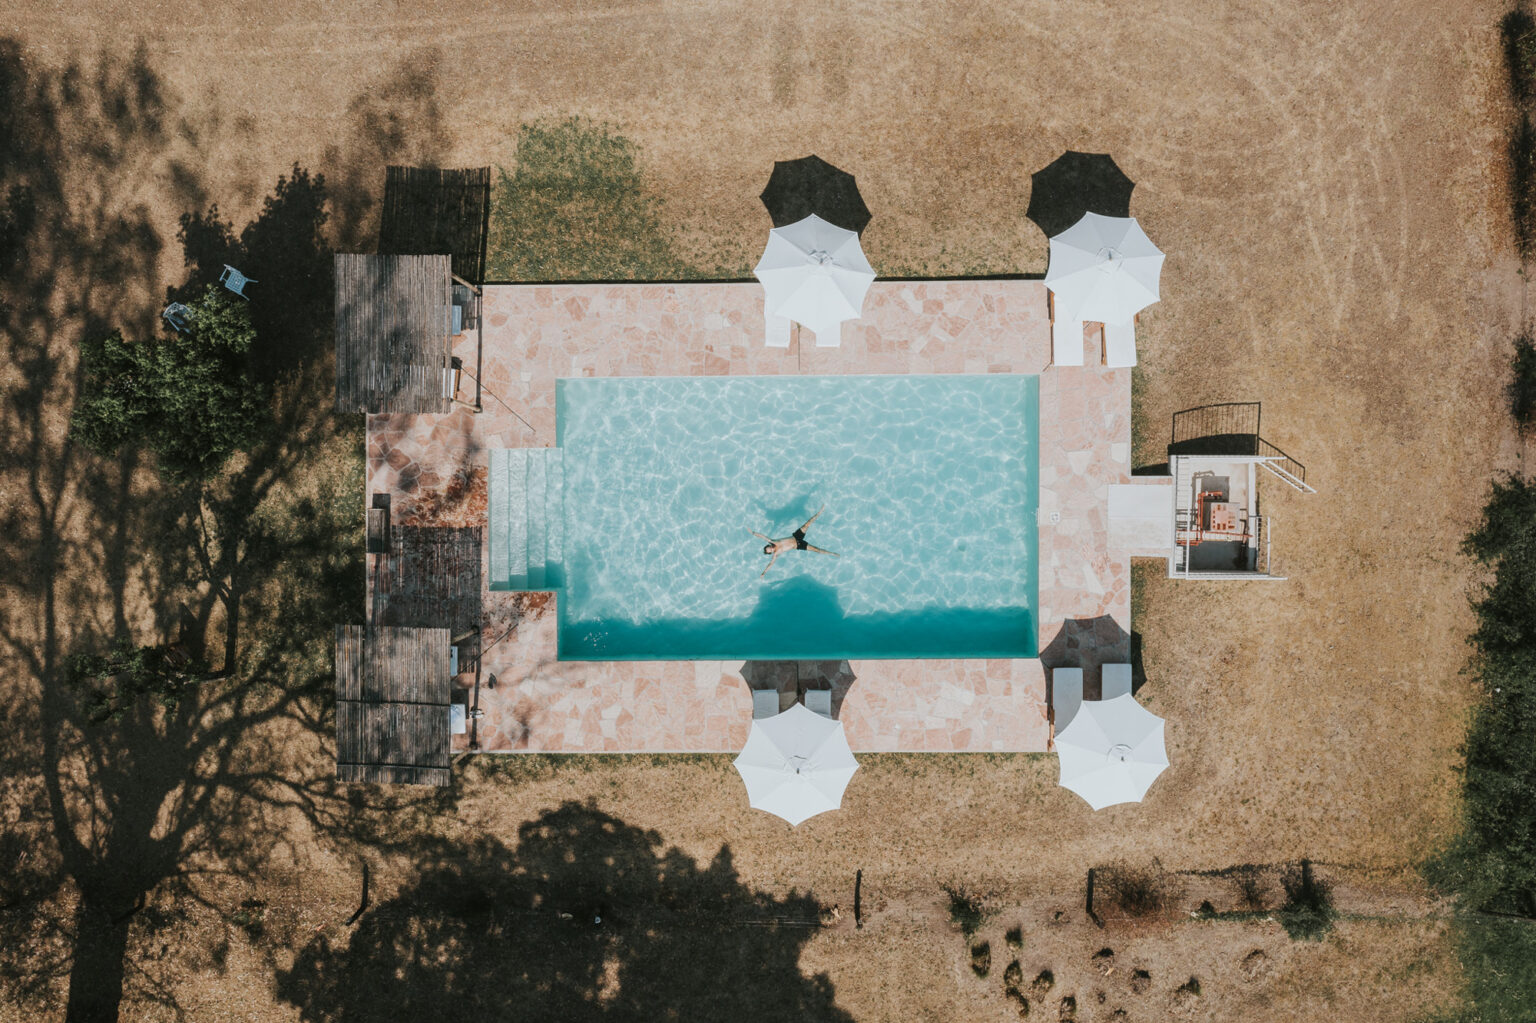 Areal view of hotel pool with umbrellas